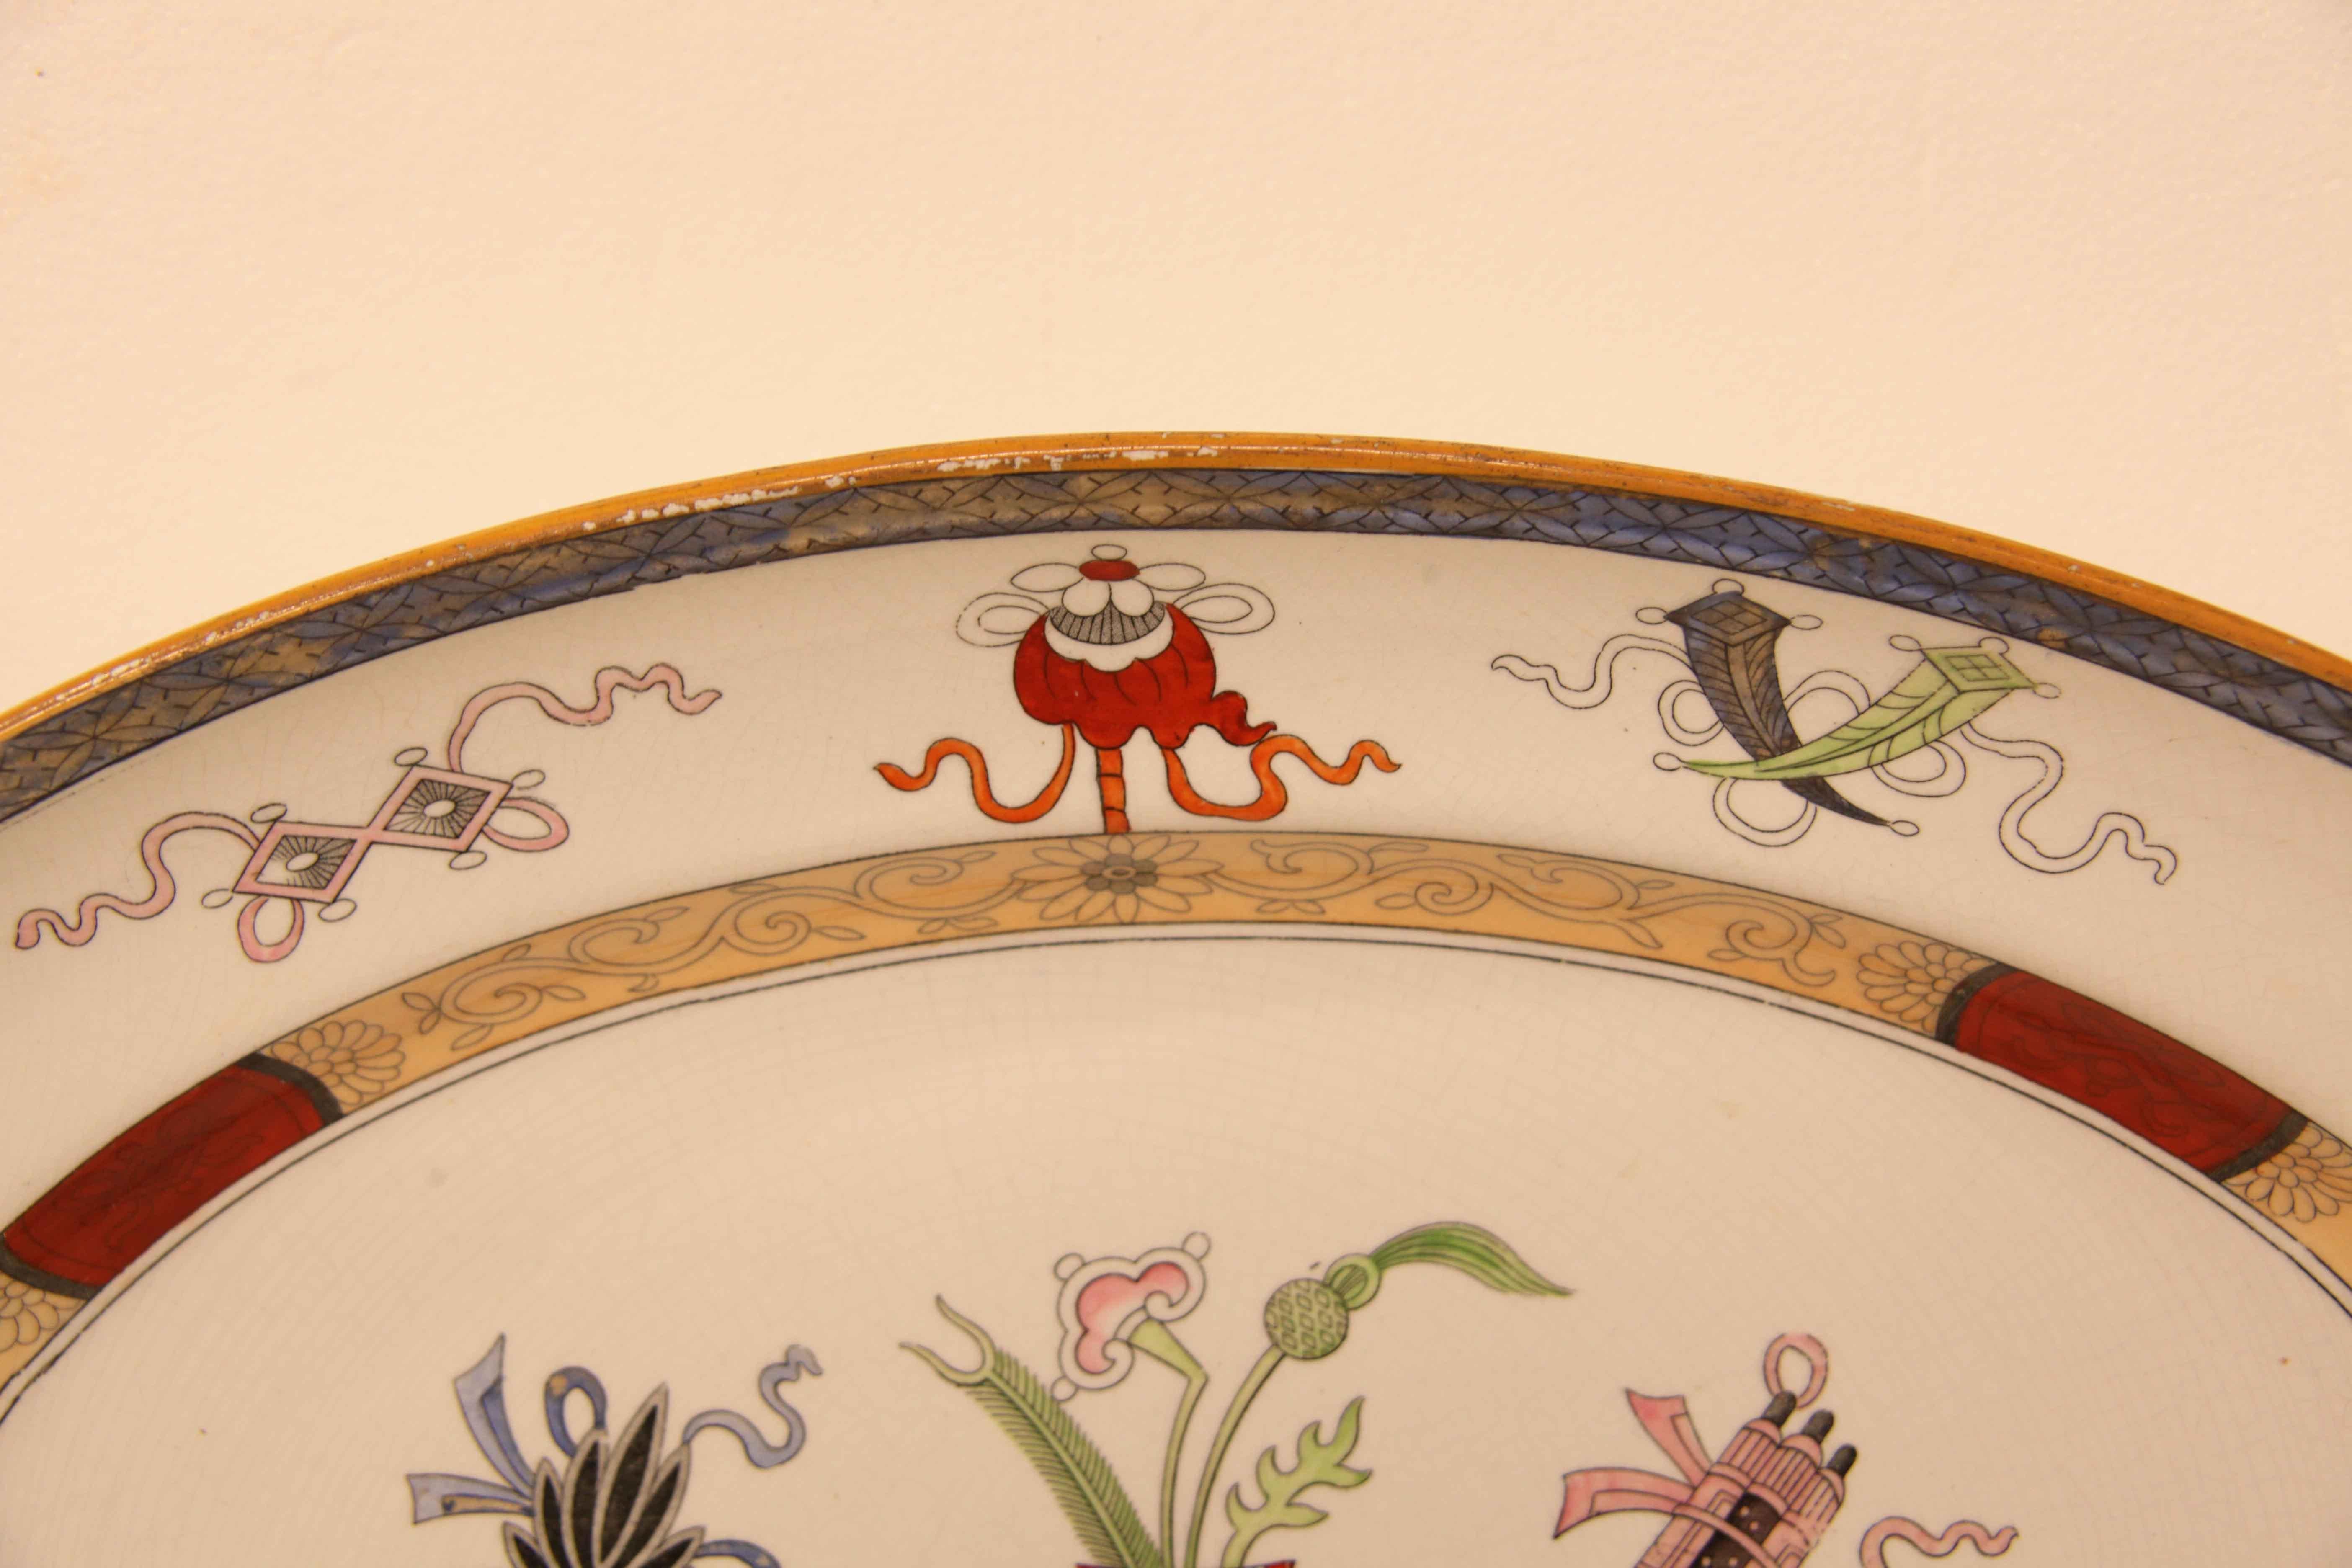 English Staffordshire platter, the rim has stylized flowers on a light blue background; the border features whimsical figures ( scrolls, flowers, etc) , this is followed by the slanted inner edge with flowers and arabesques on a salmon colored